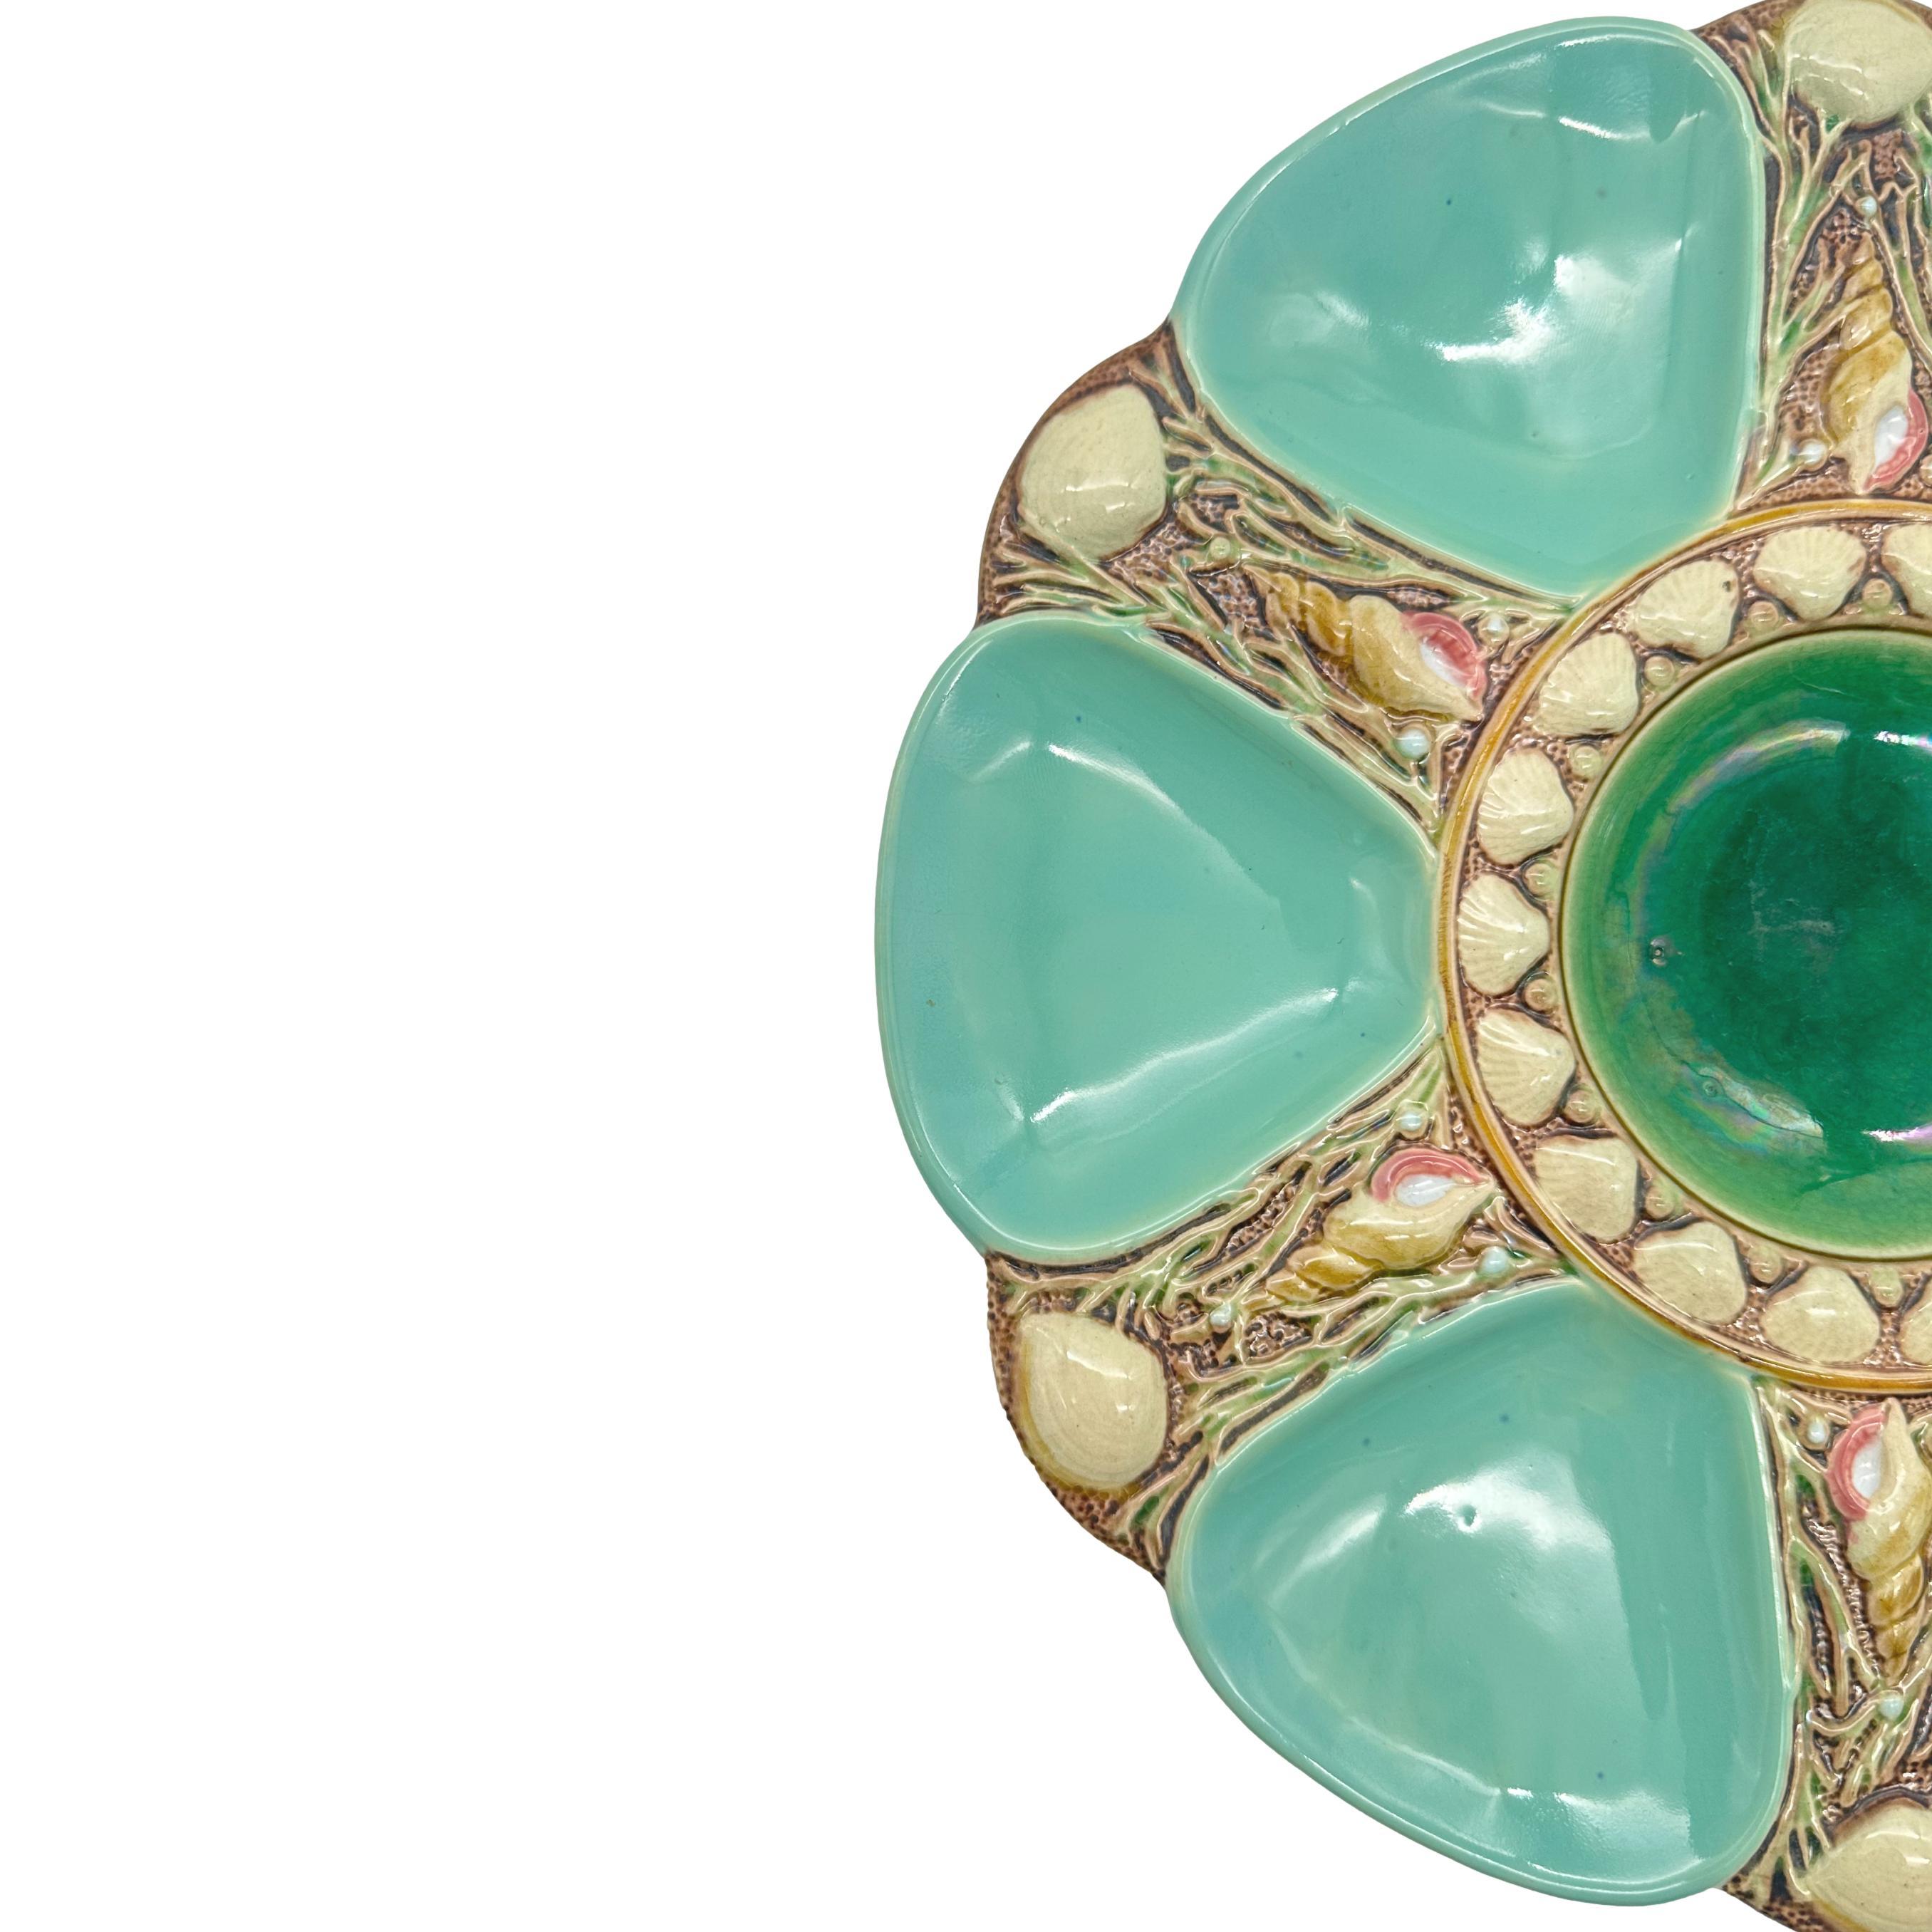 Minton Majolica Oyster Plate, the relief-molded dish with six oyster wells glazed in seafoam green, each well separated by shells and seaweed and a naturalistically molded and glazed auger shell, the center well glazed in green and banded with